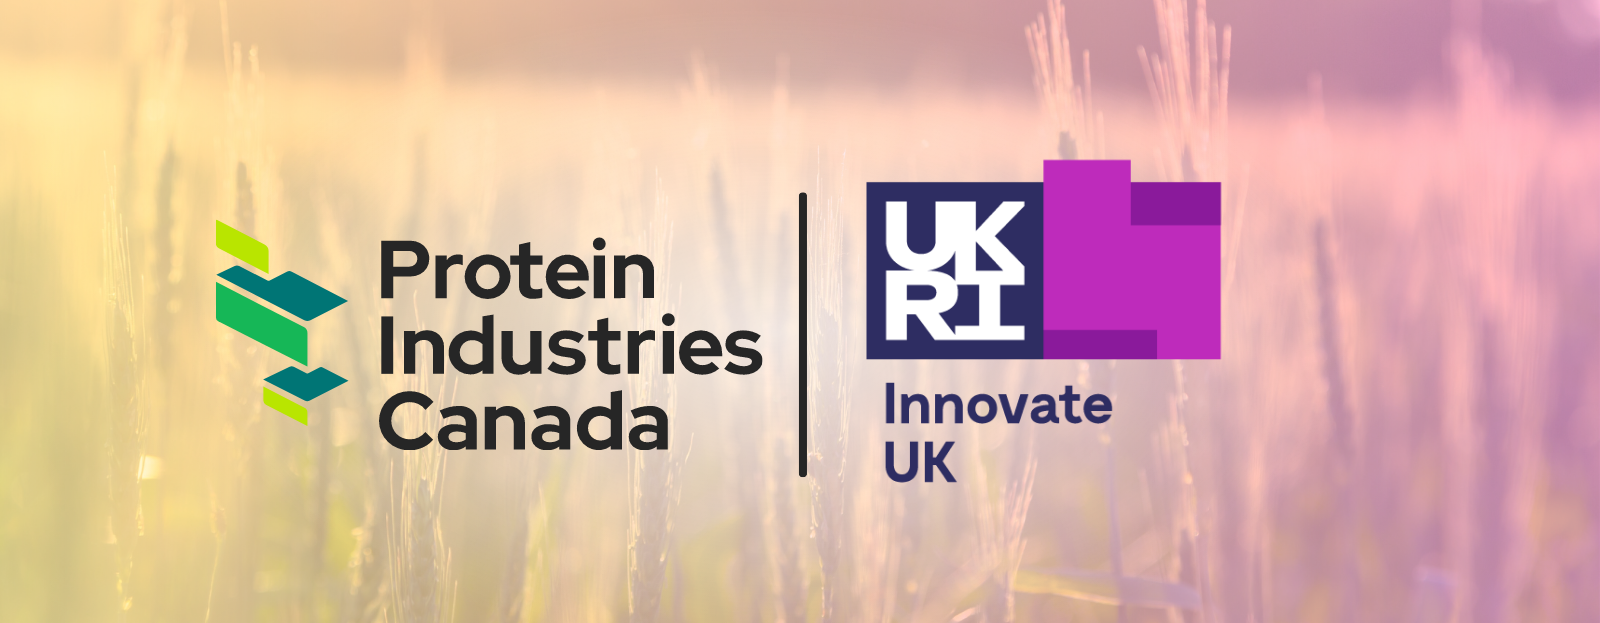 Protein Industries Canada and innovate UK partnership announced